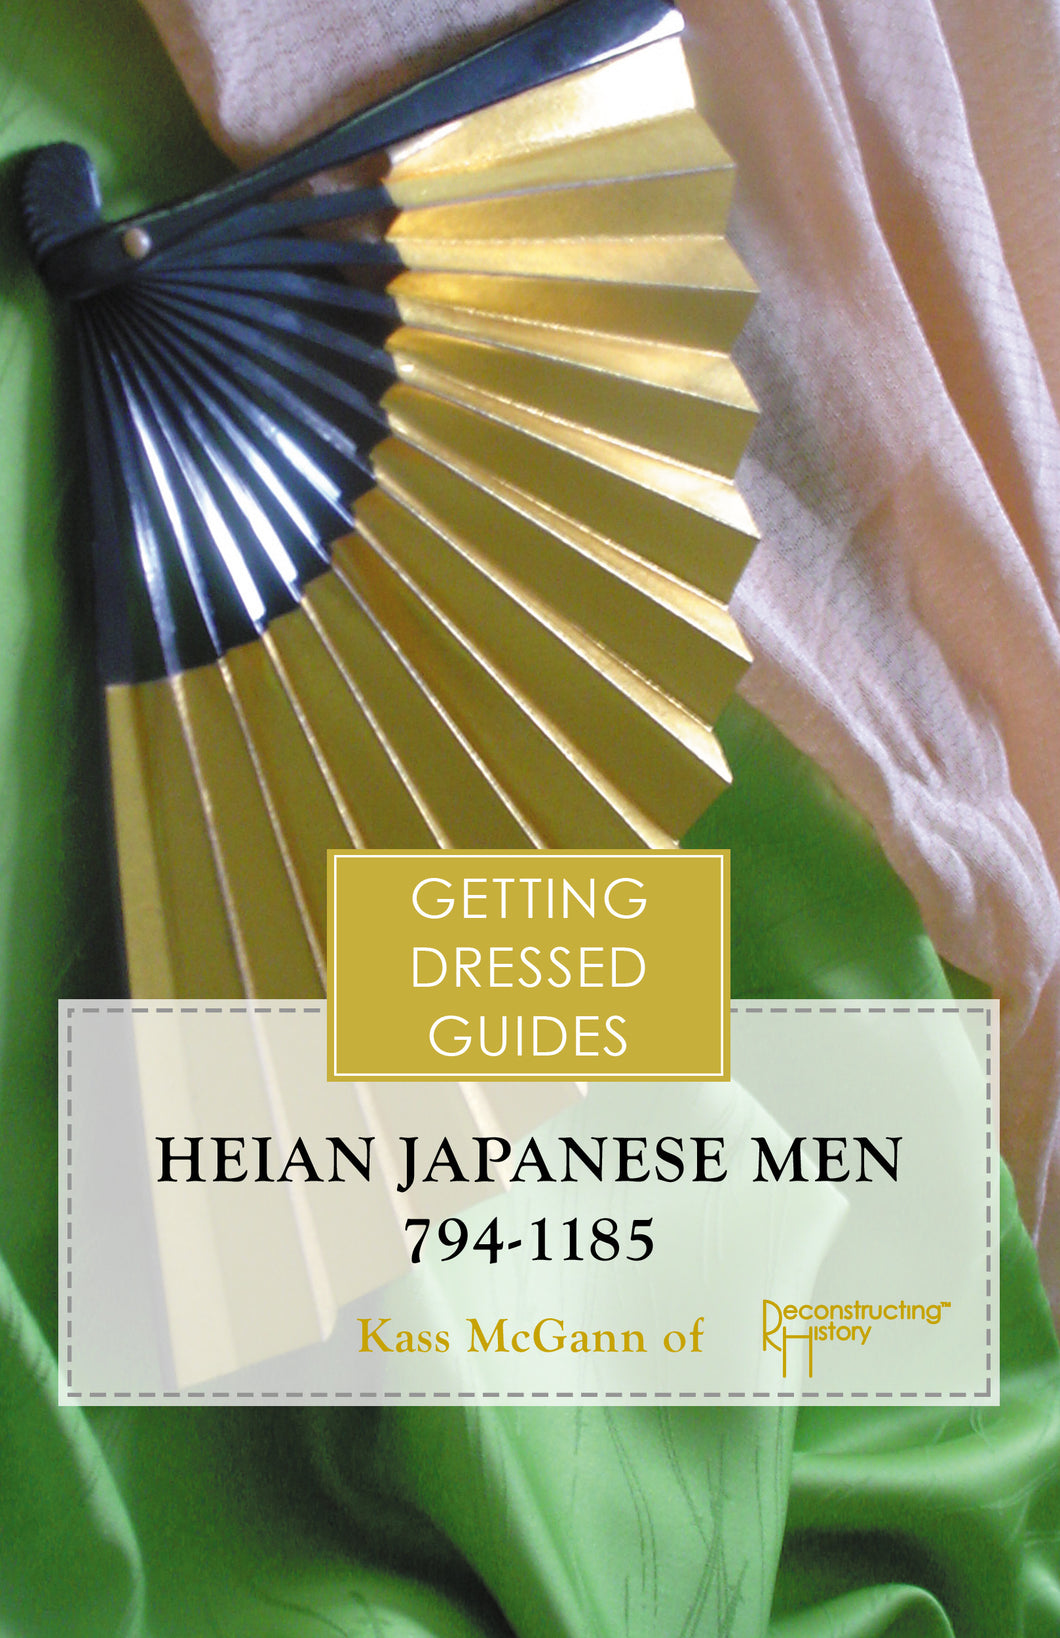 Heian Japanese Men's Getting Dressed Guide